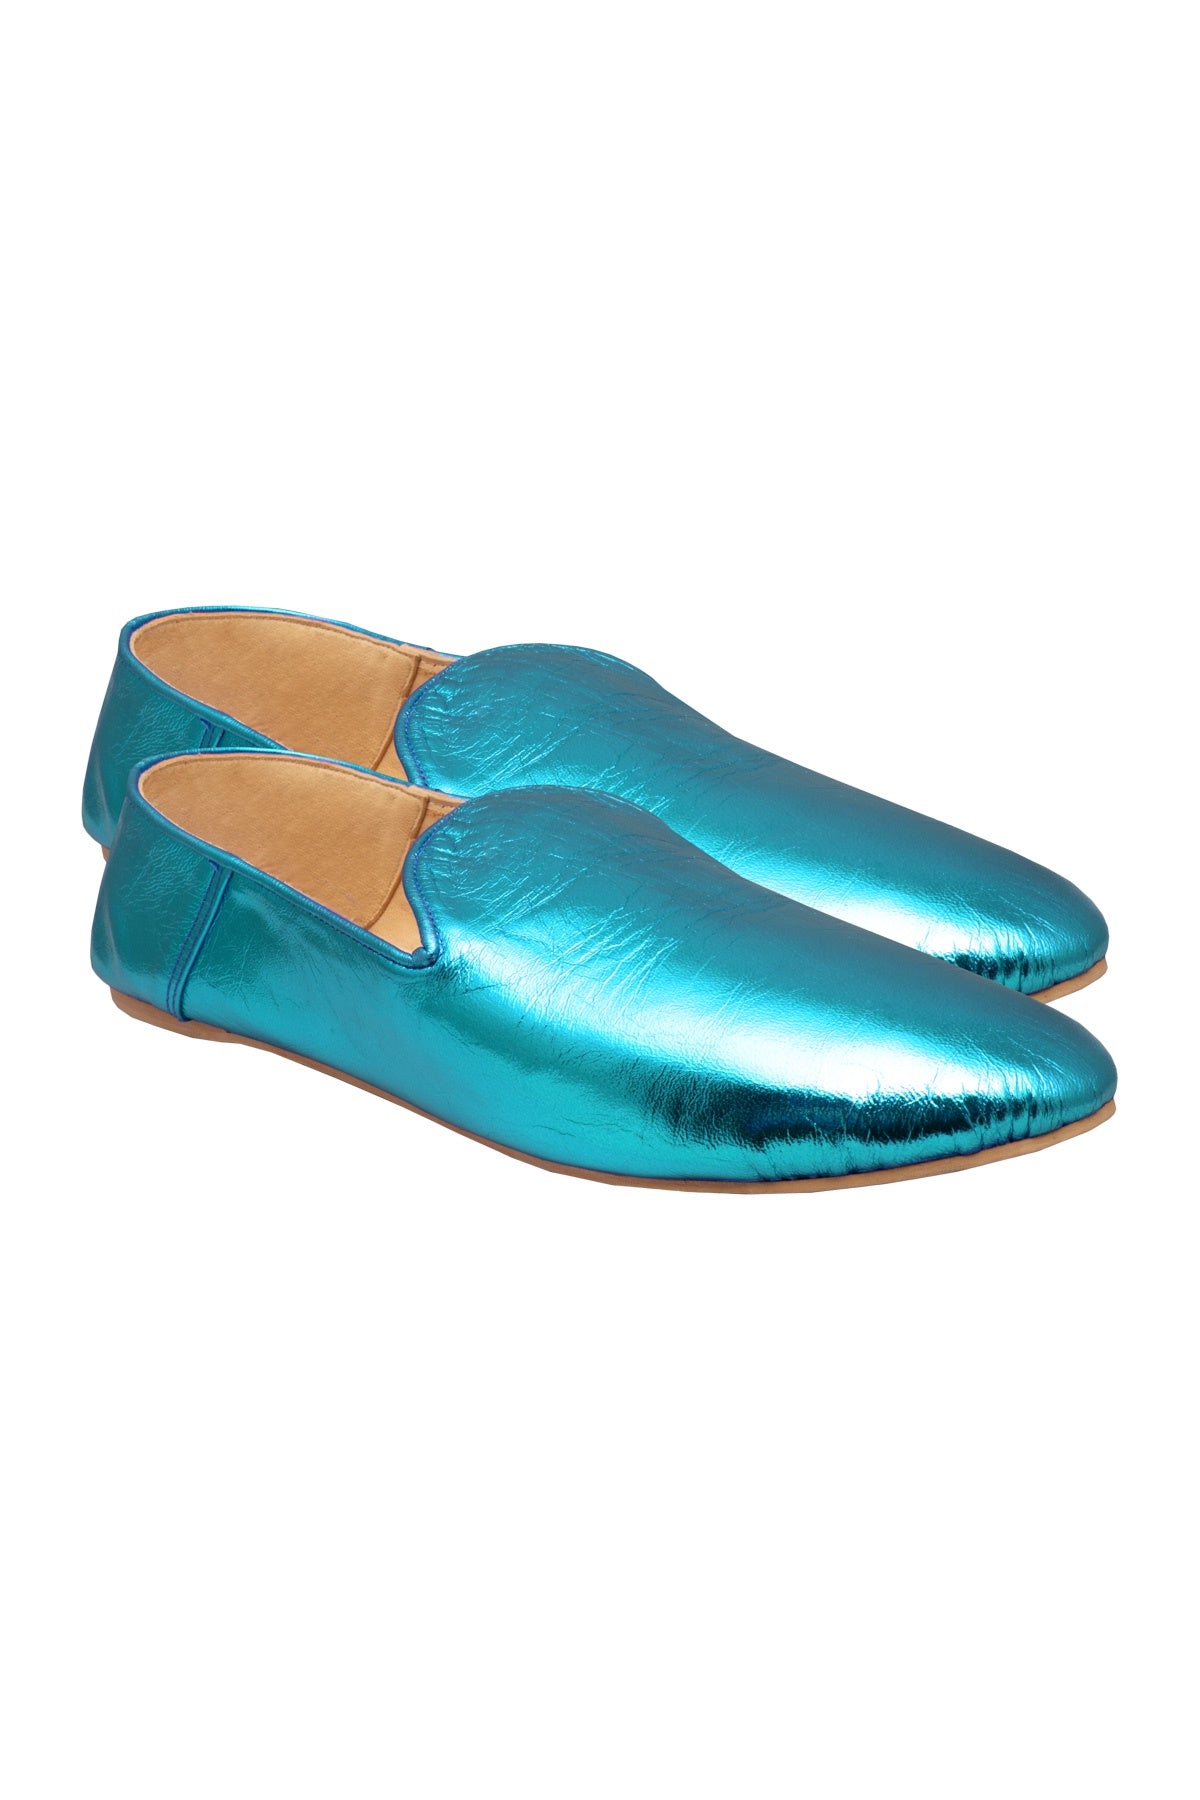 Leather Slippers - Metallic Blue